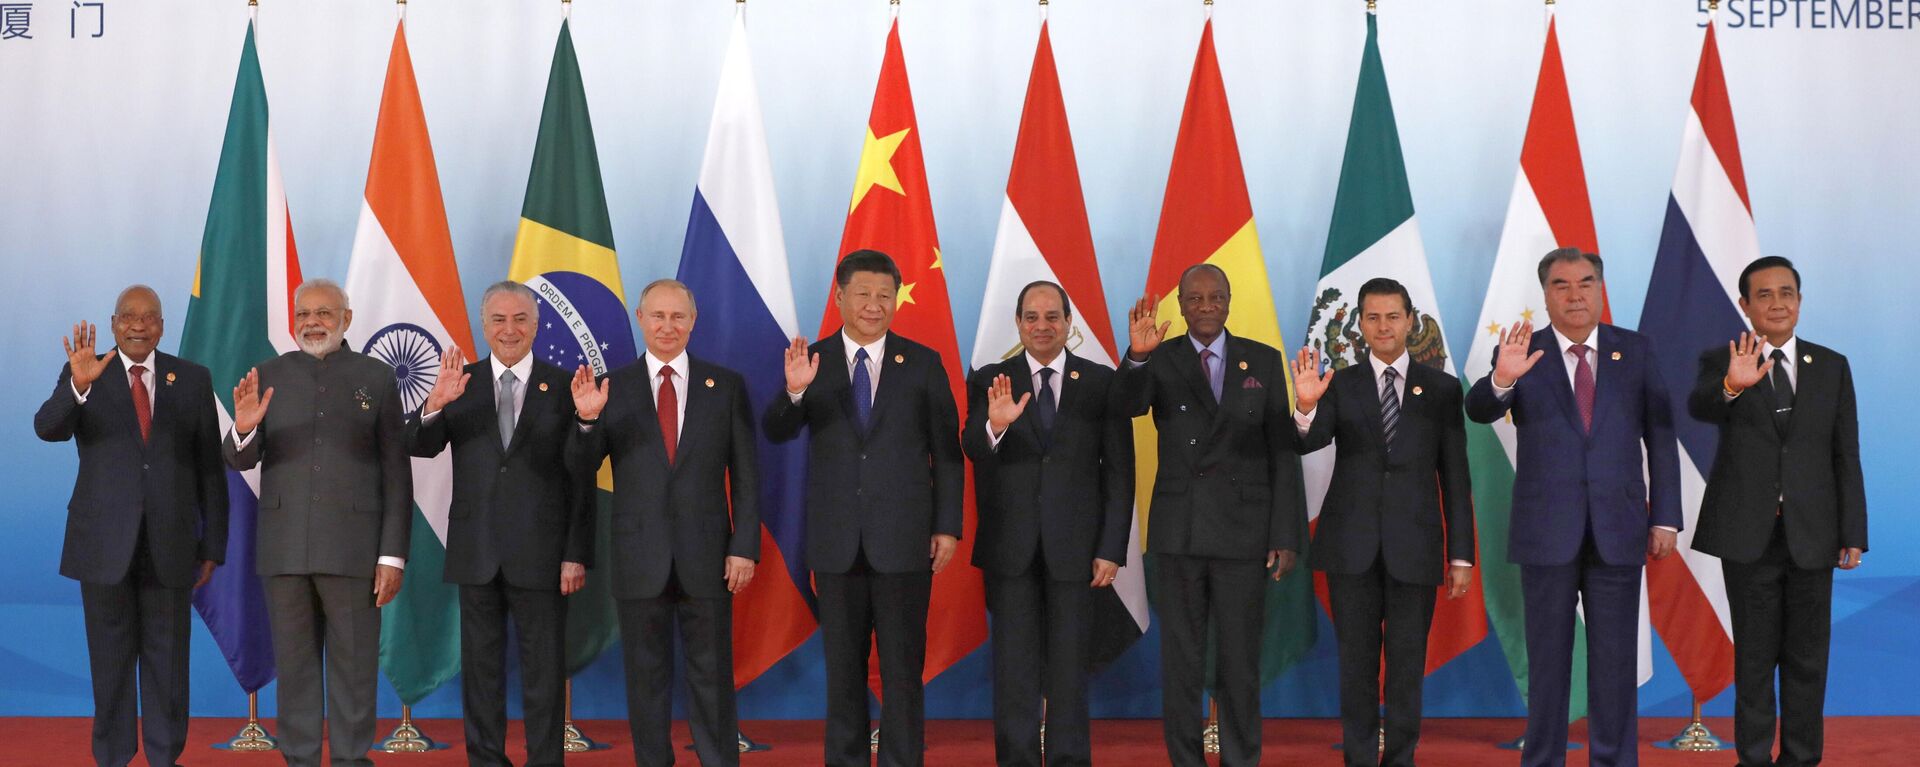 Leaders from left to right, South Africa's President Jacob Zuma, Indian Prime Minister Narendra Modi, Brazilian President Michel Temer, Russian President Vladimir Putin, Chinese President Xi Jinping, Egypt's President Abdel-Fattah el-Sissi, Guinea's President Alpha Conde, Mexico's President Enrique Pena Nieto, Tajikistan's President Emomali Rahmon and Thai Prime Minister Prayuth Chan-ocha pose for group photo ahead of the Emerging Market and Developing Countries meeting at the BRICS Summit, in Xiamen, China, Tuesday, Sept. 5, 2017. - Sputnik Africa, 1920, 04.01.2024